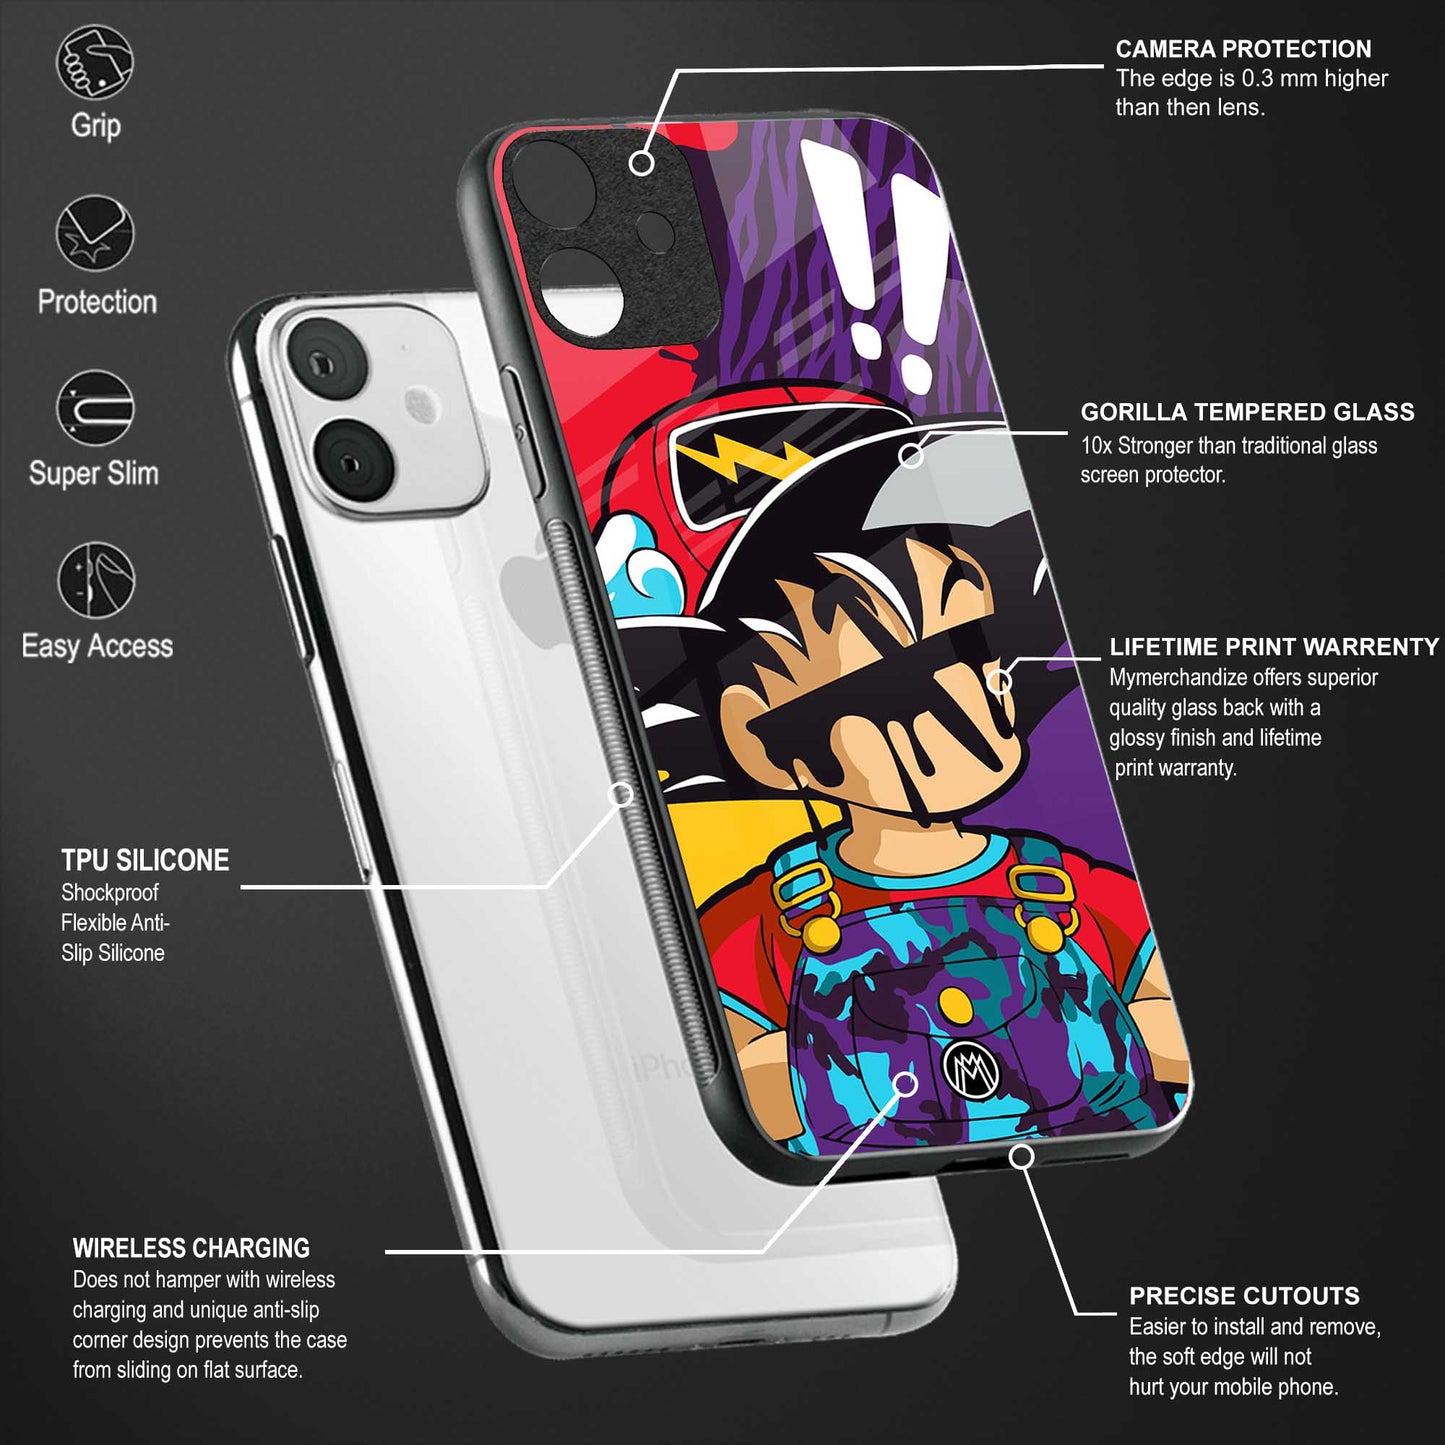 dragon ball z art phone cover for iphone 6s plus